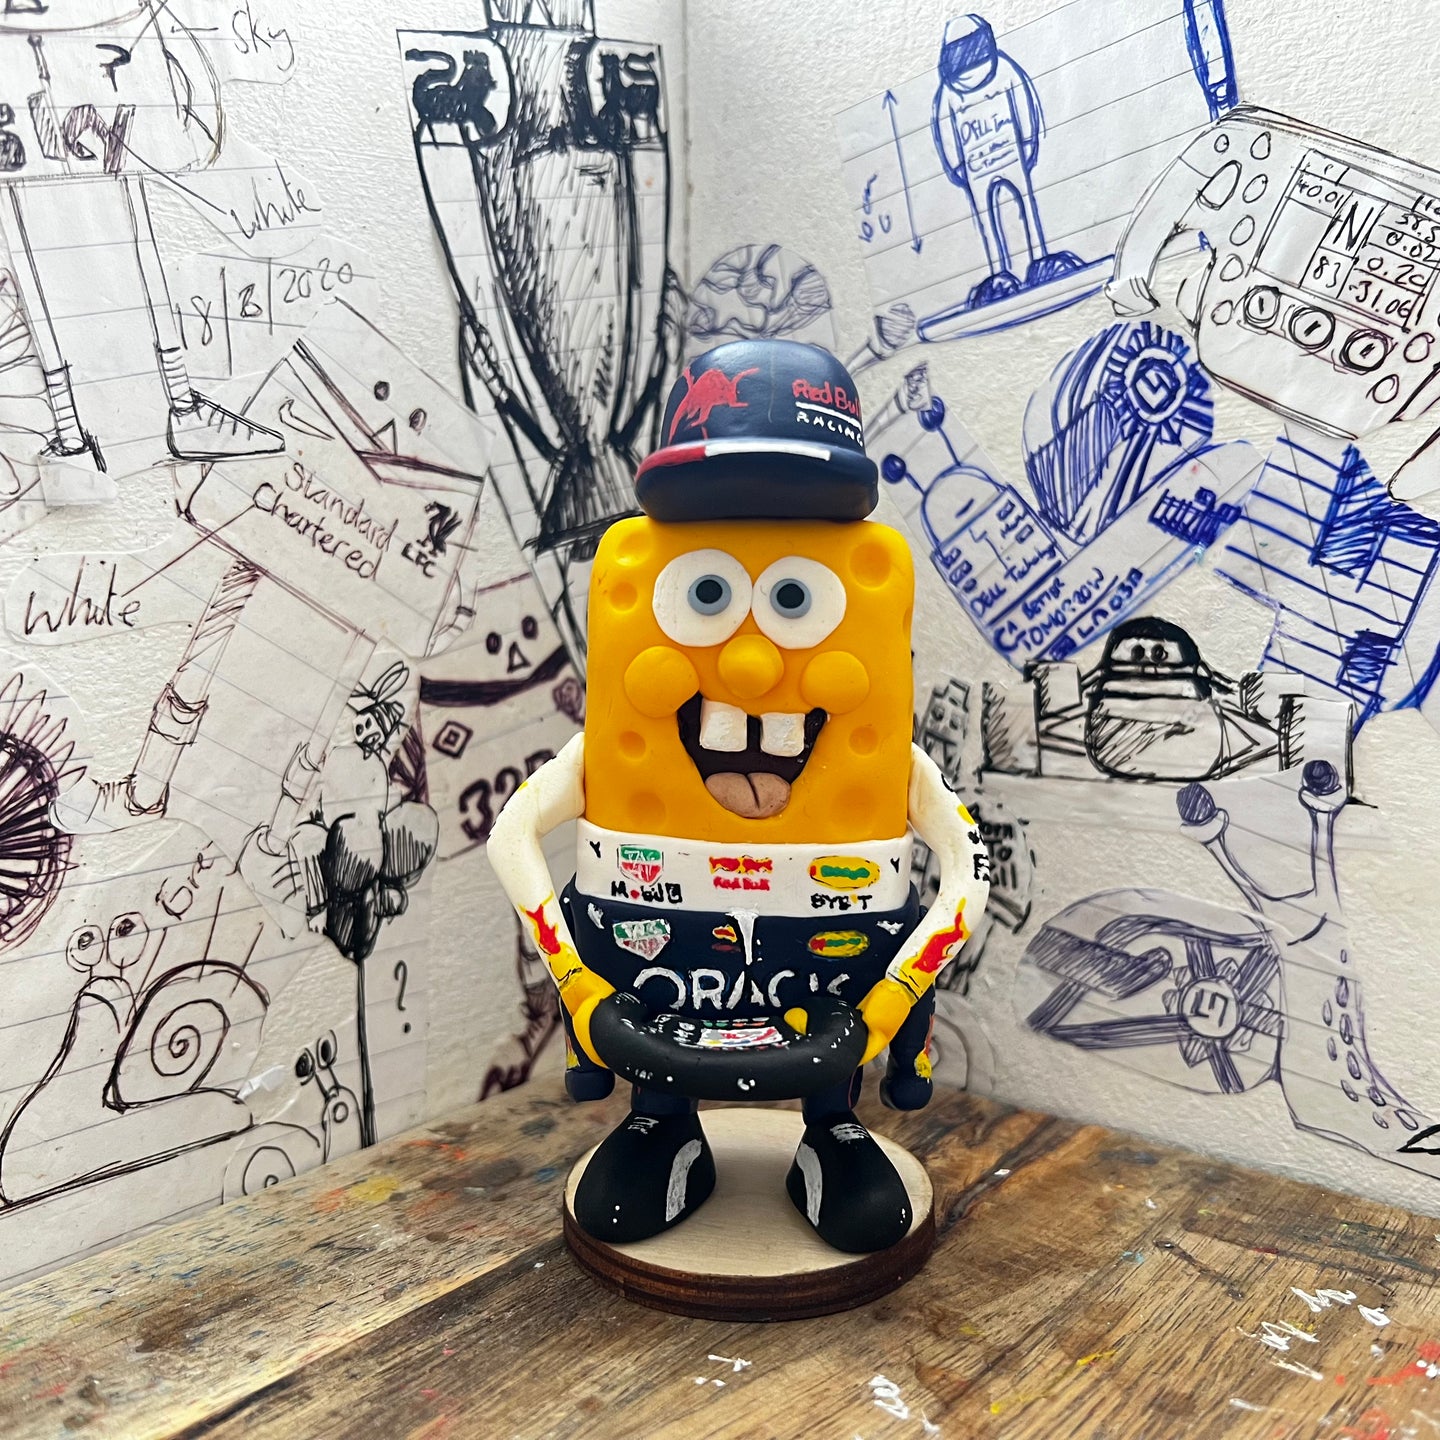 SpongeBob in his F1 max suit and Hat 2022 – The footy bird shop